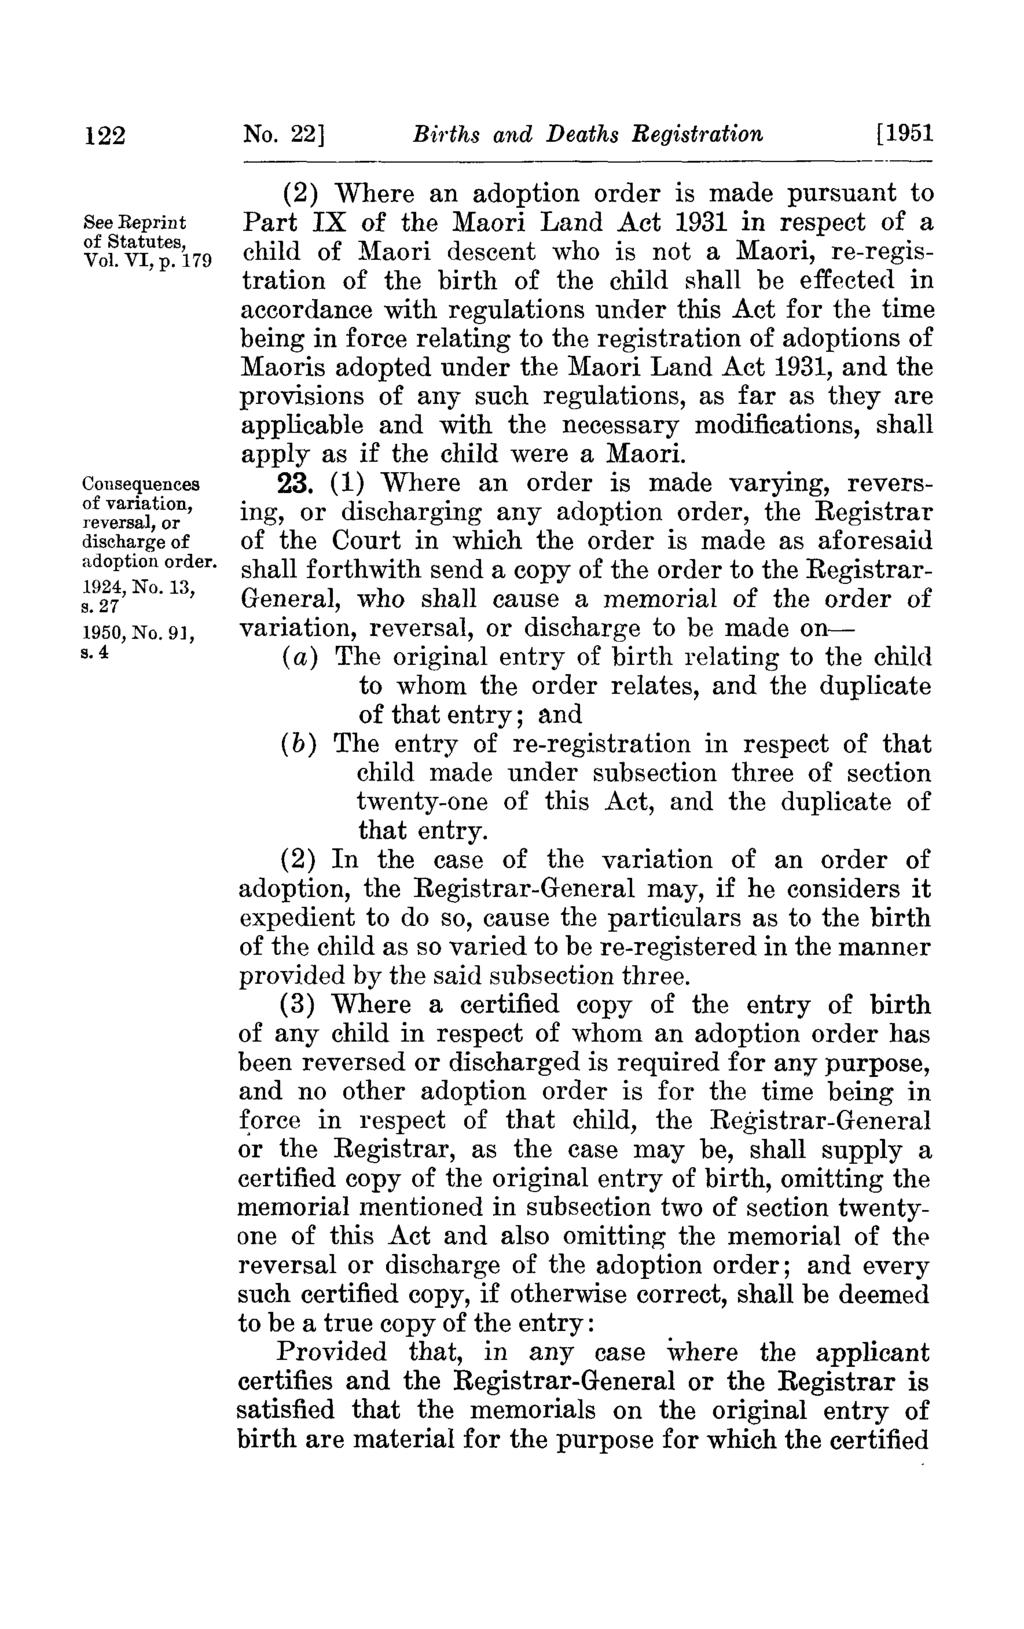 122 See Reprint of Statutes, Vol. VI, p. 179 Consequences of variation, reversal, or discharge of adoption order. s.27 1950, No. 9], s.4 No.